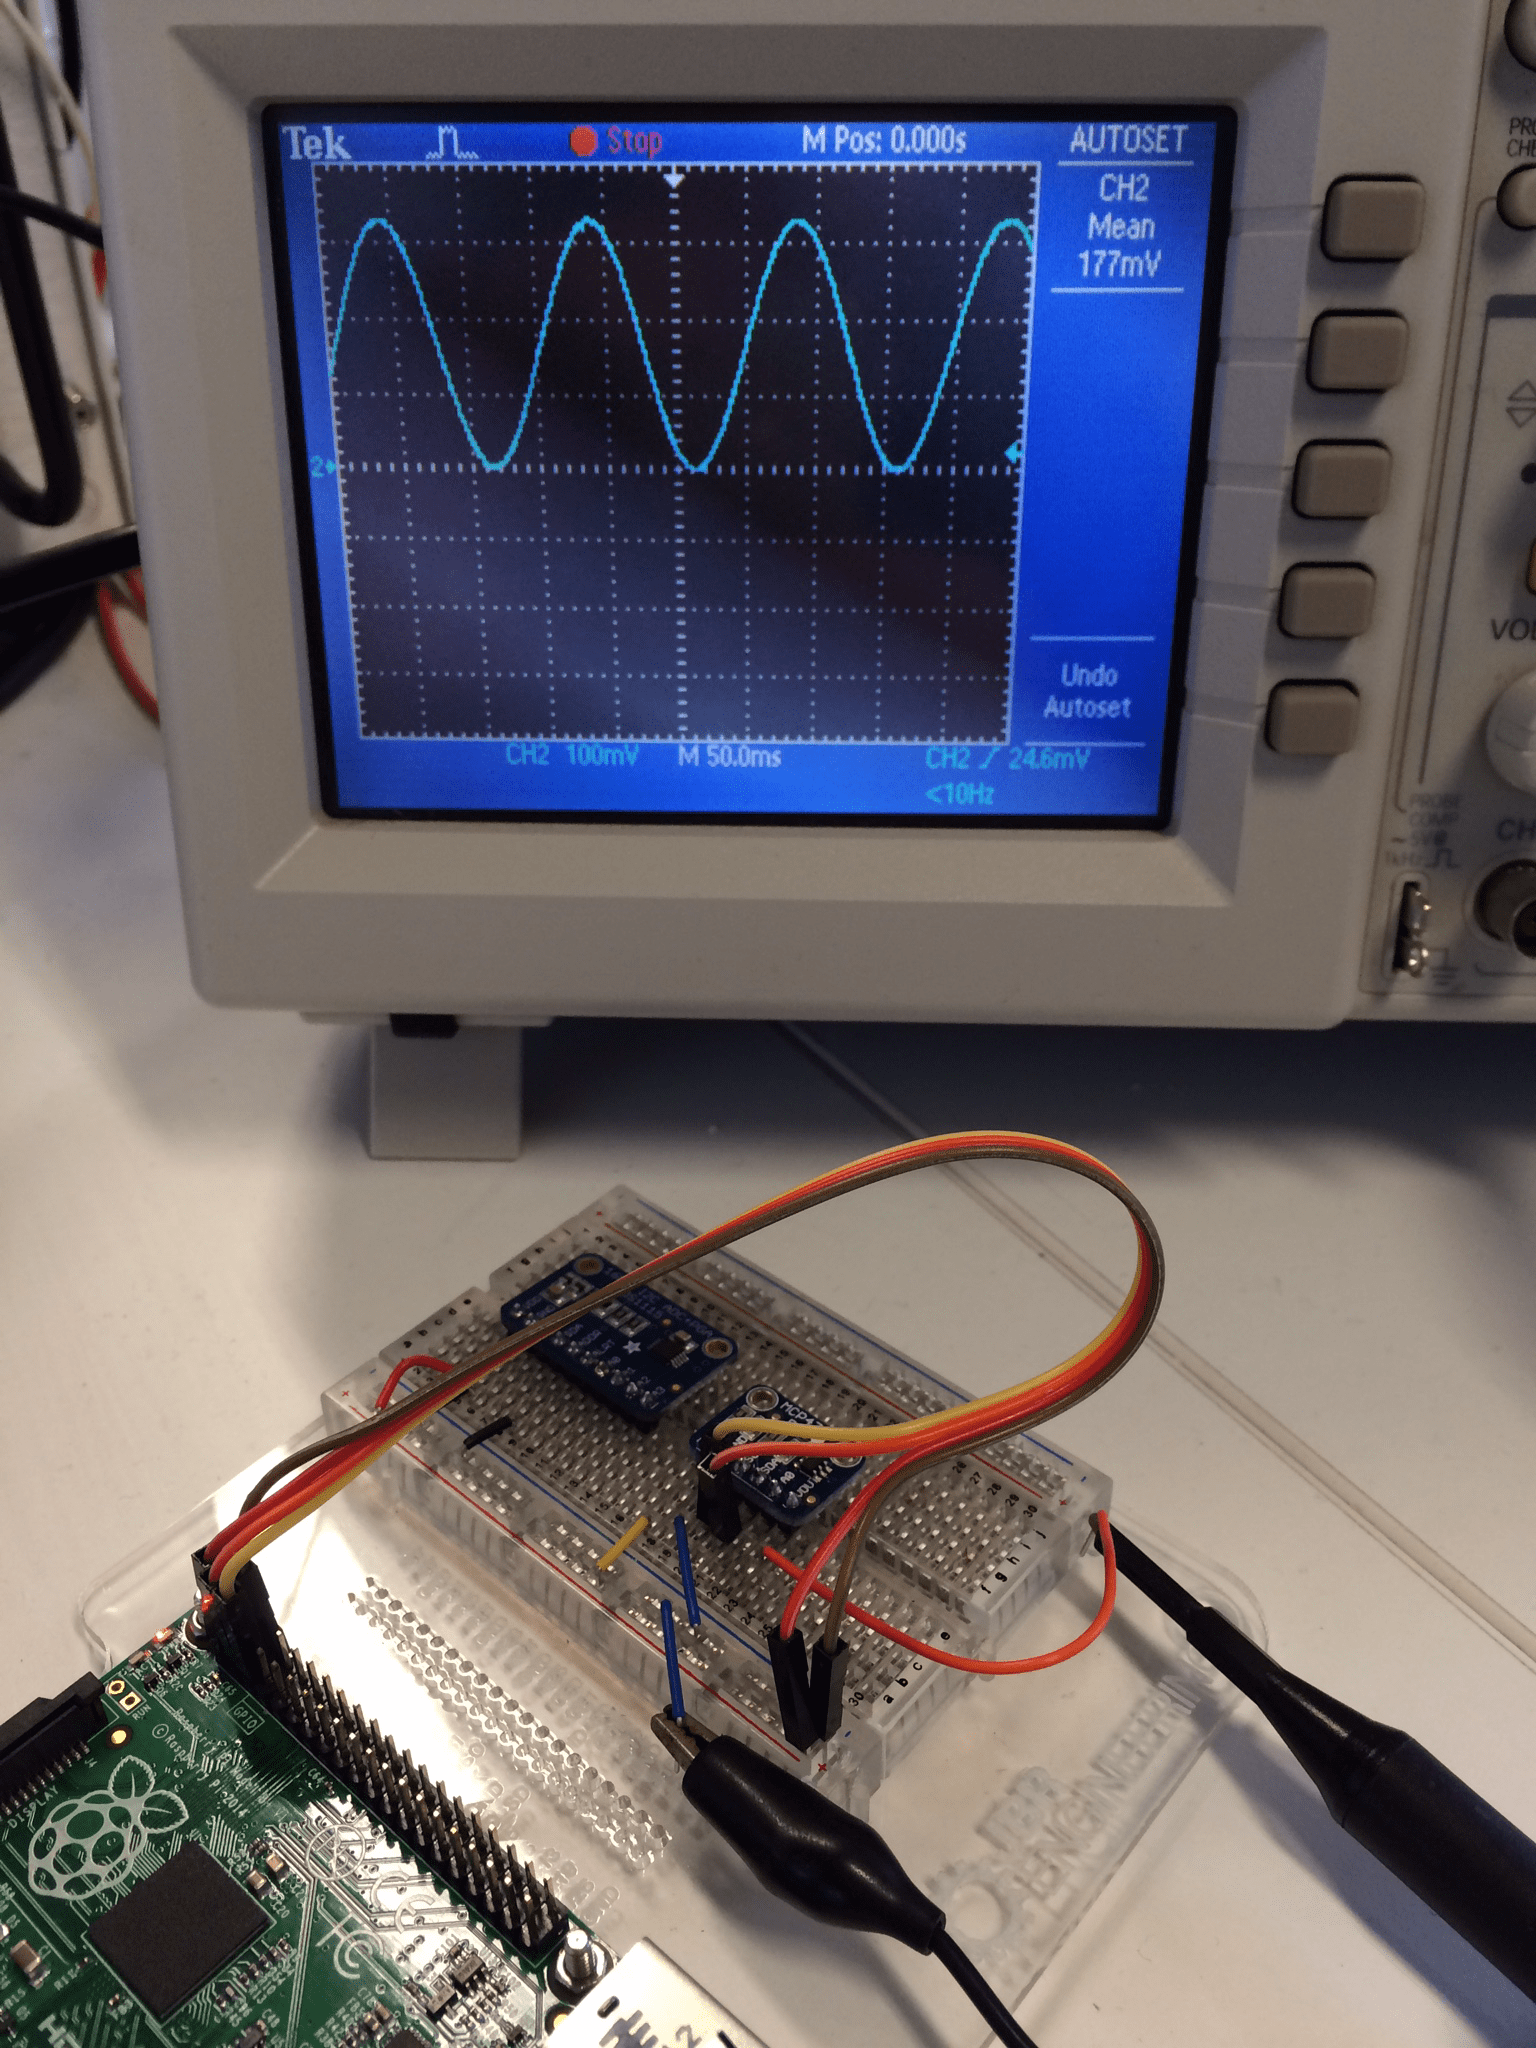 Using my driver for wiringPi, a sine wave being produced by the MCP4725